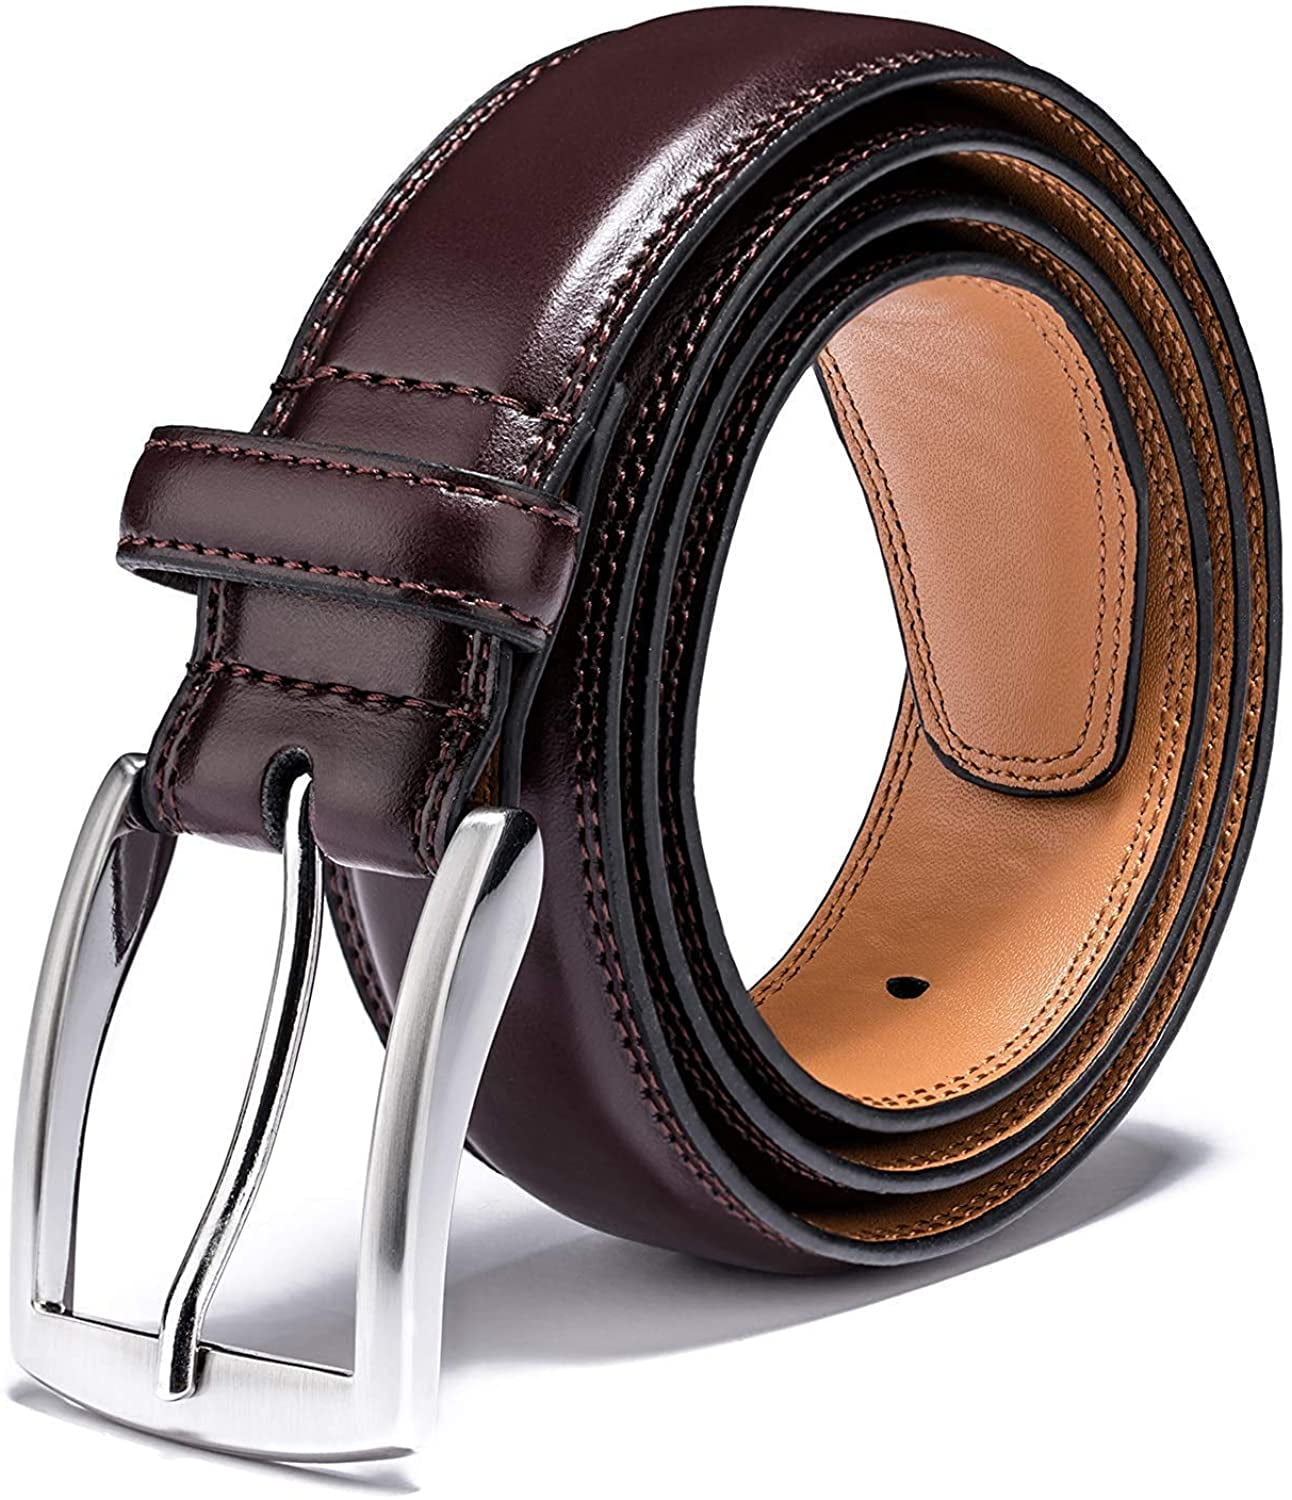 Fashion & Classic Designs for Work Business and Casual Mens Genuine Leather Dress Belt 100% Cow Leather Handmade